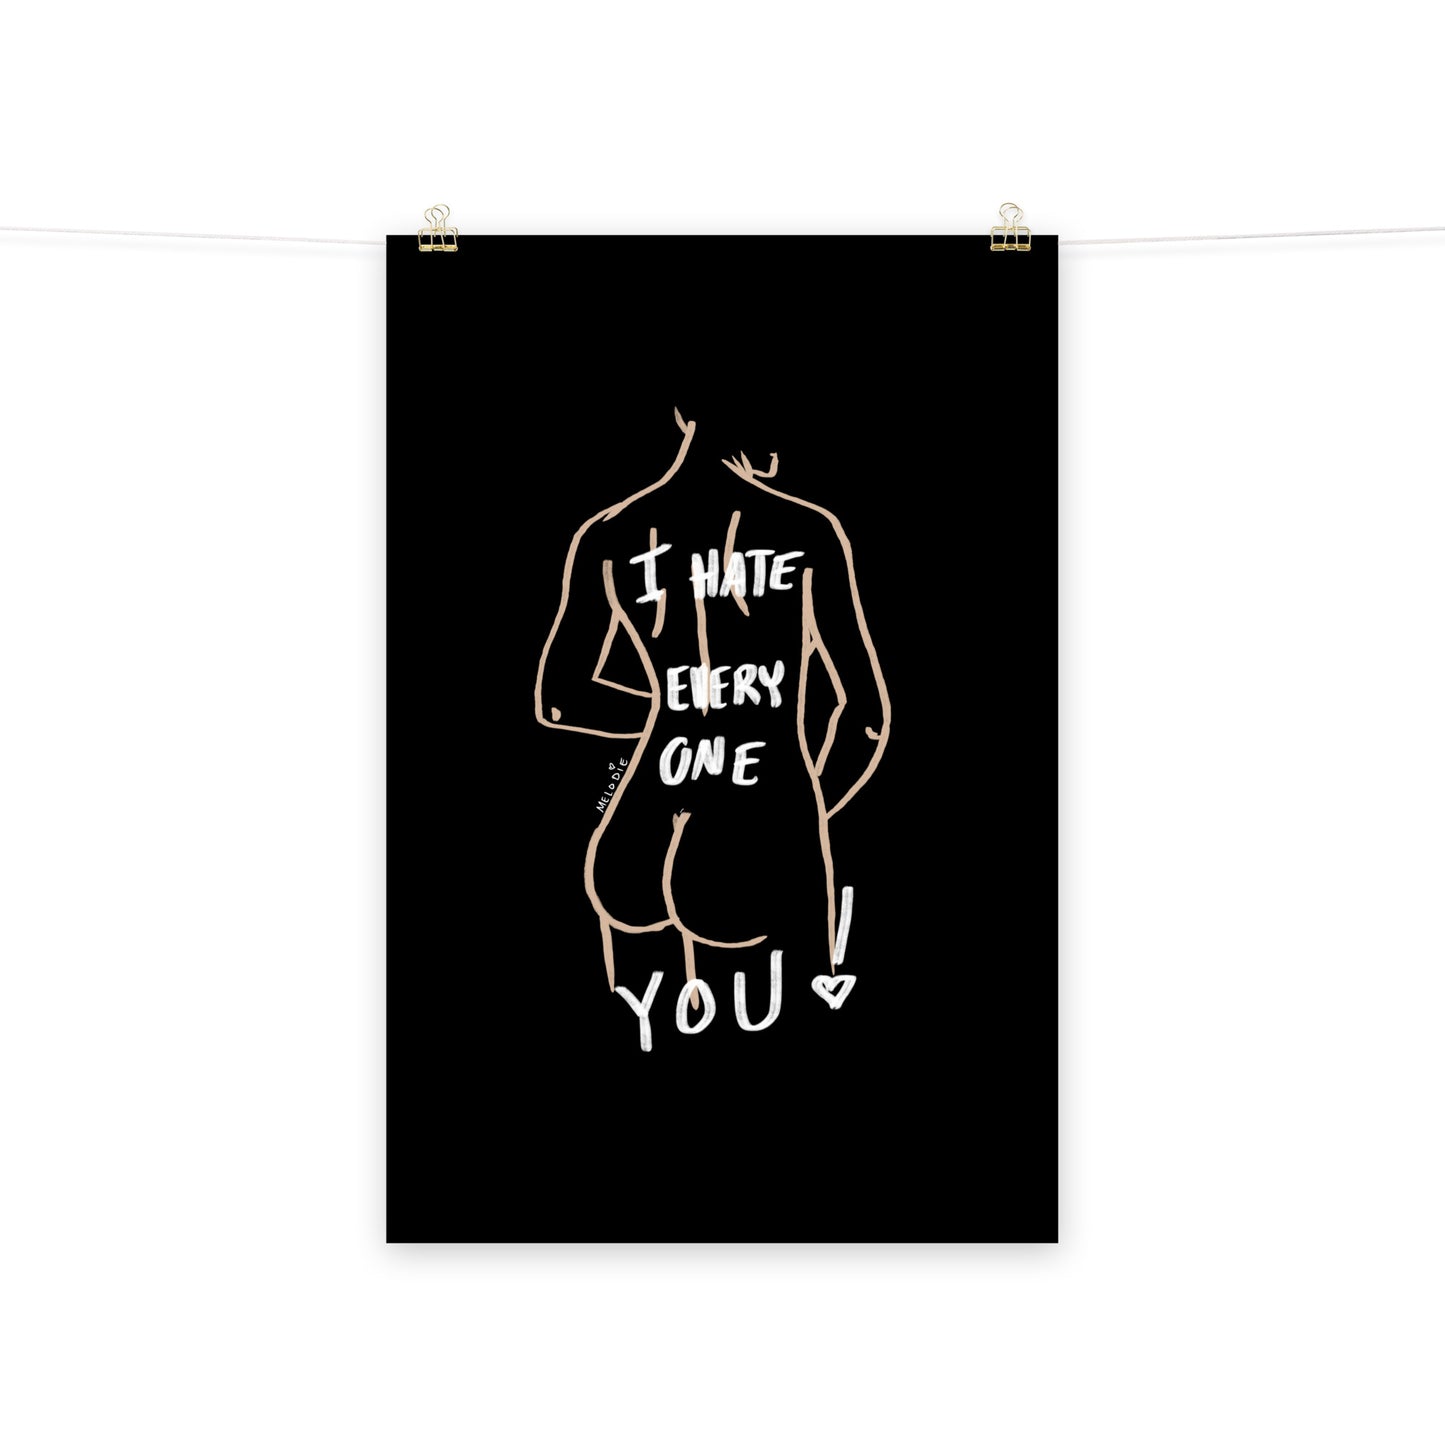 " I Hate Everyone Butt You " Print/Poster